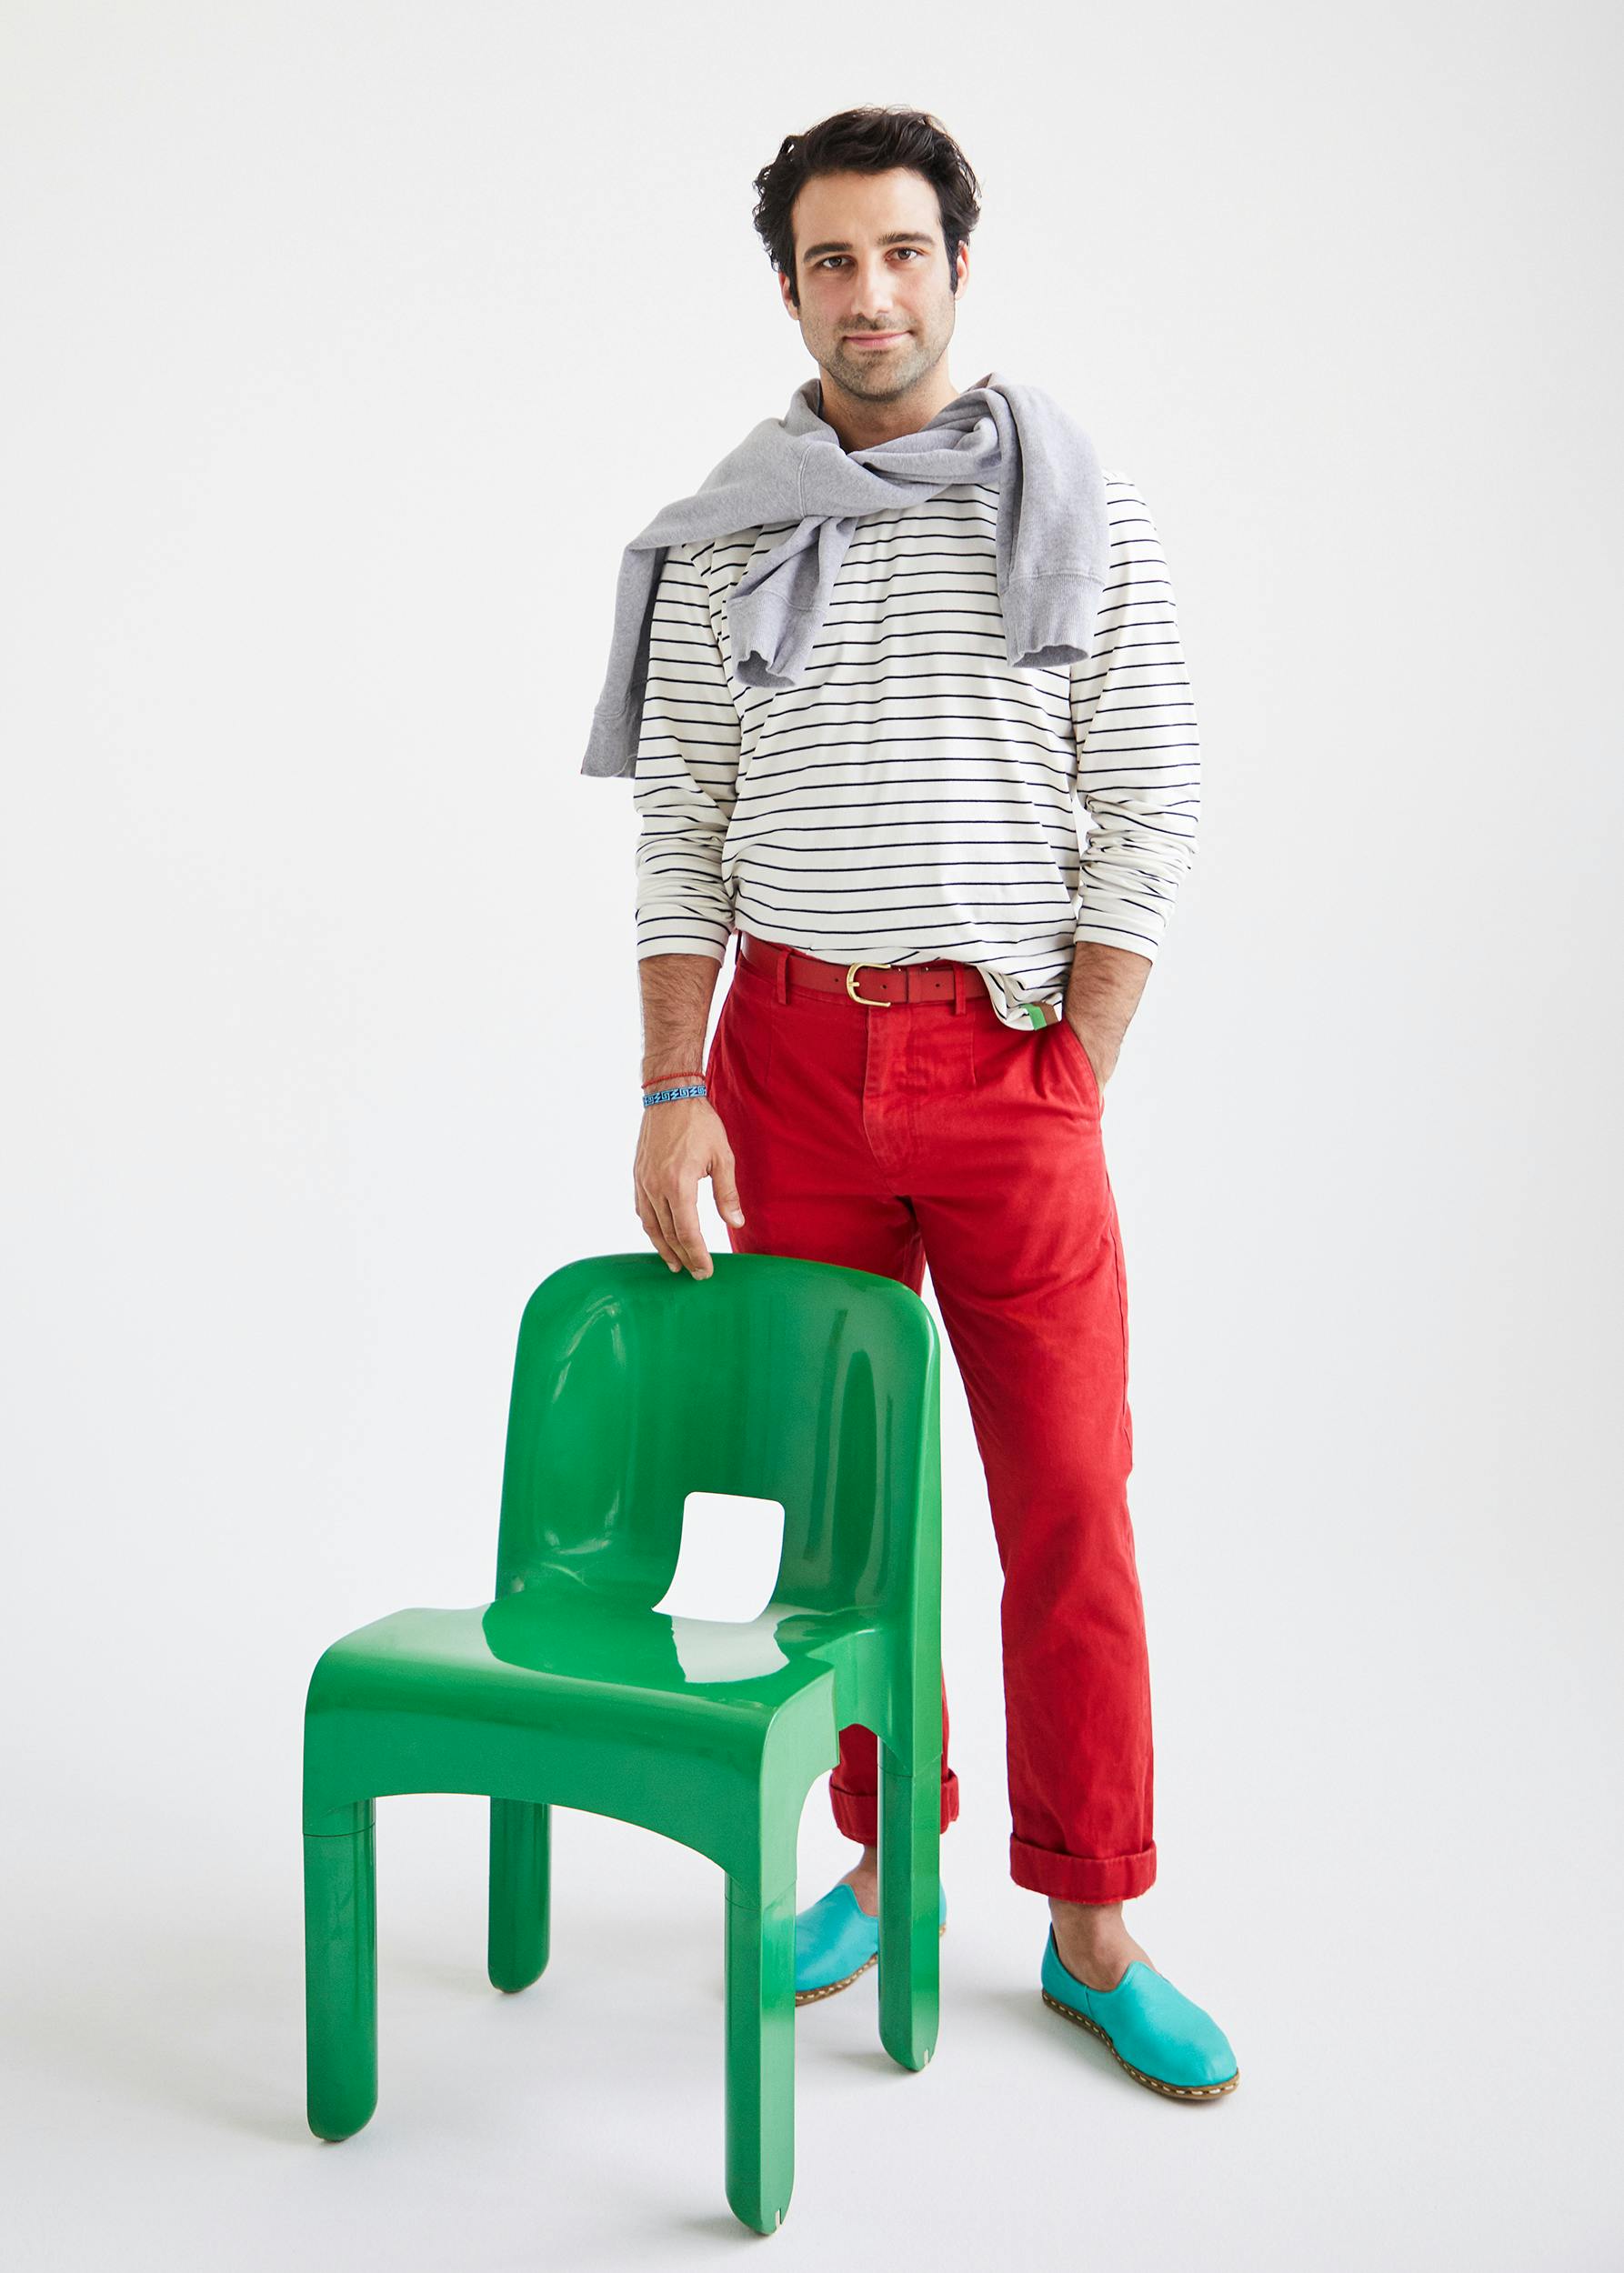 Cool stylish man in striped tee and red pants for a casual outfit